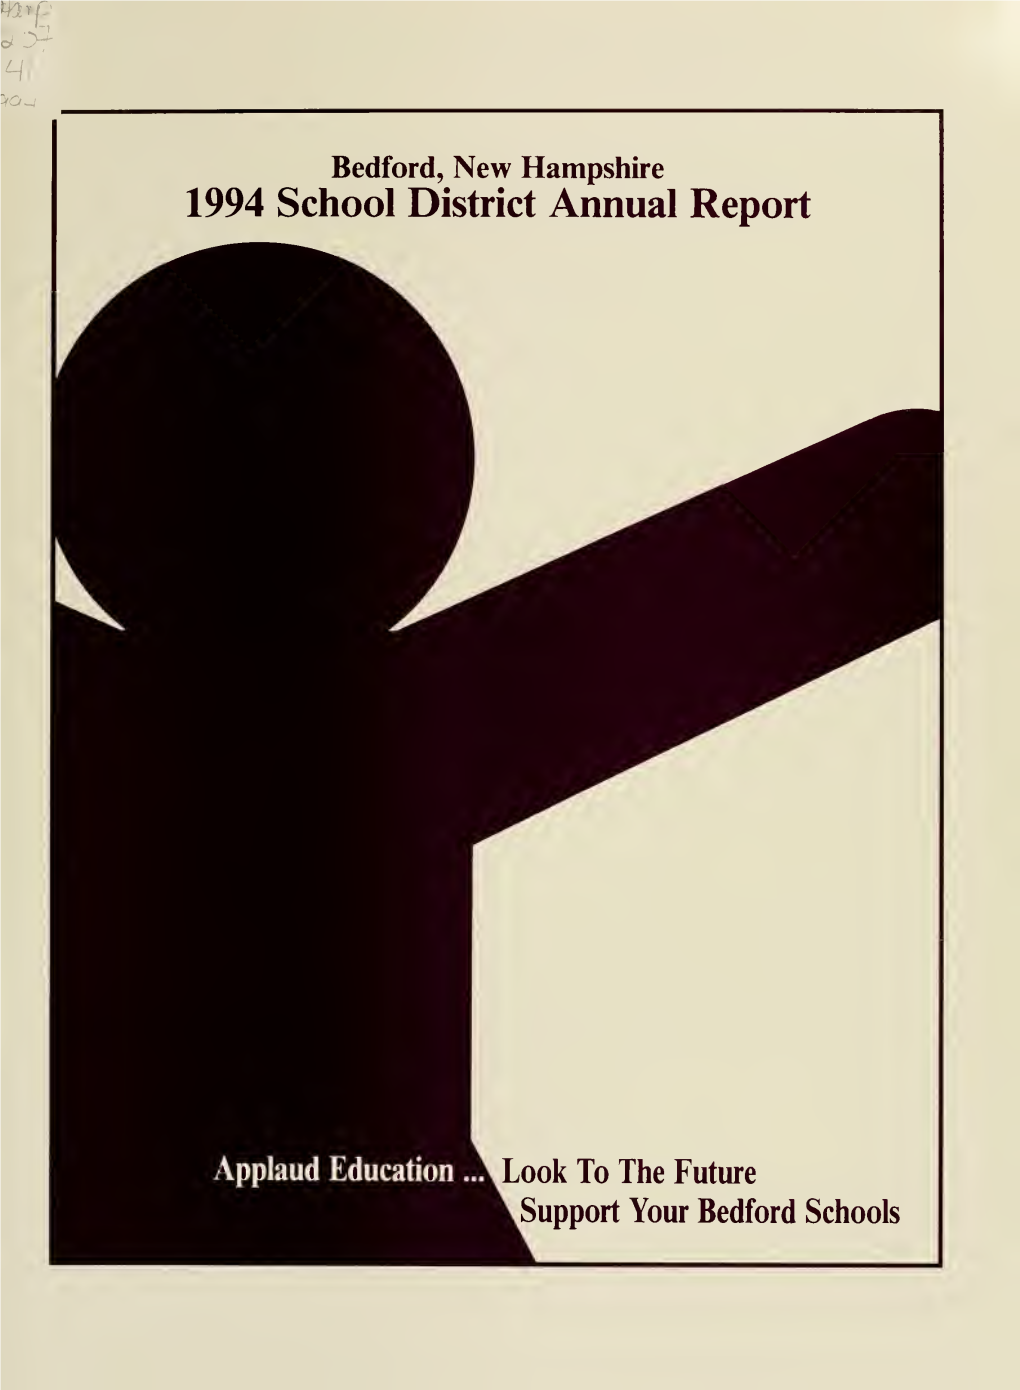 Bedford, New Hampshire, 1994 School District Annual Report